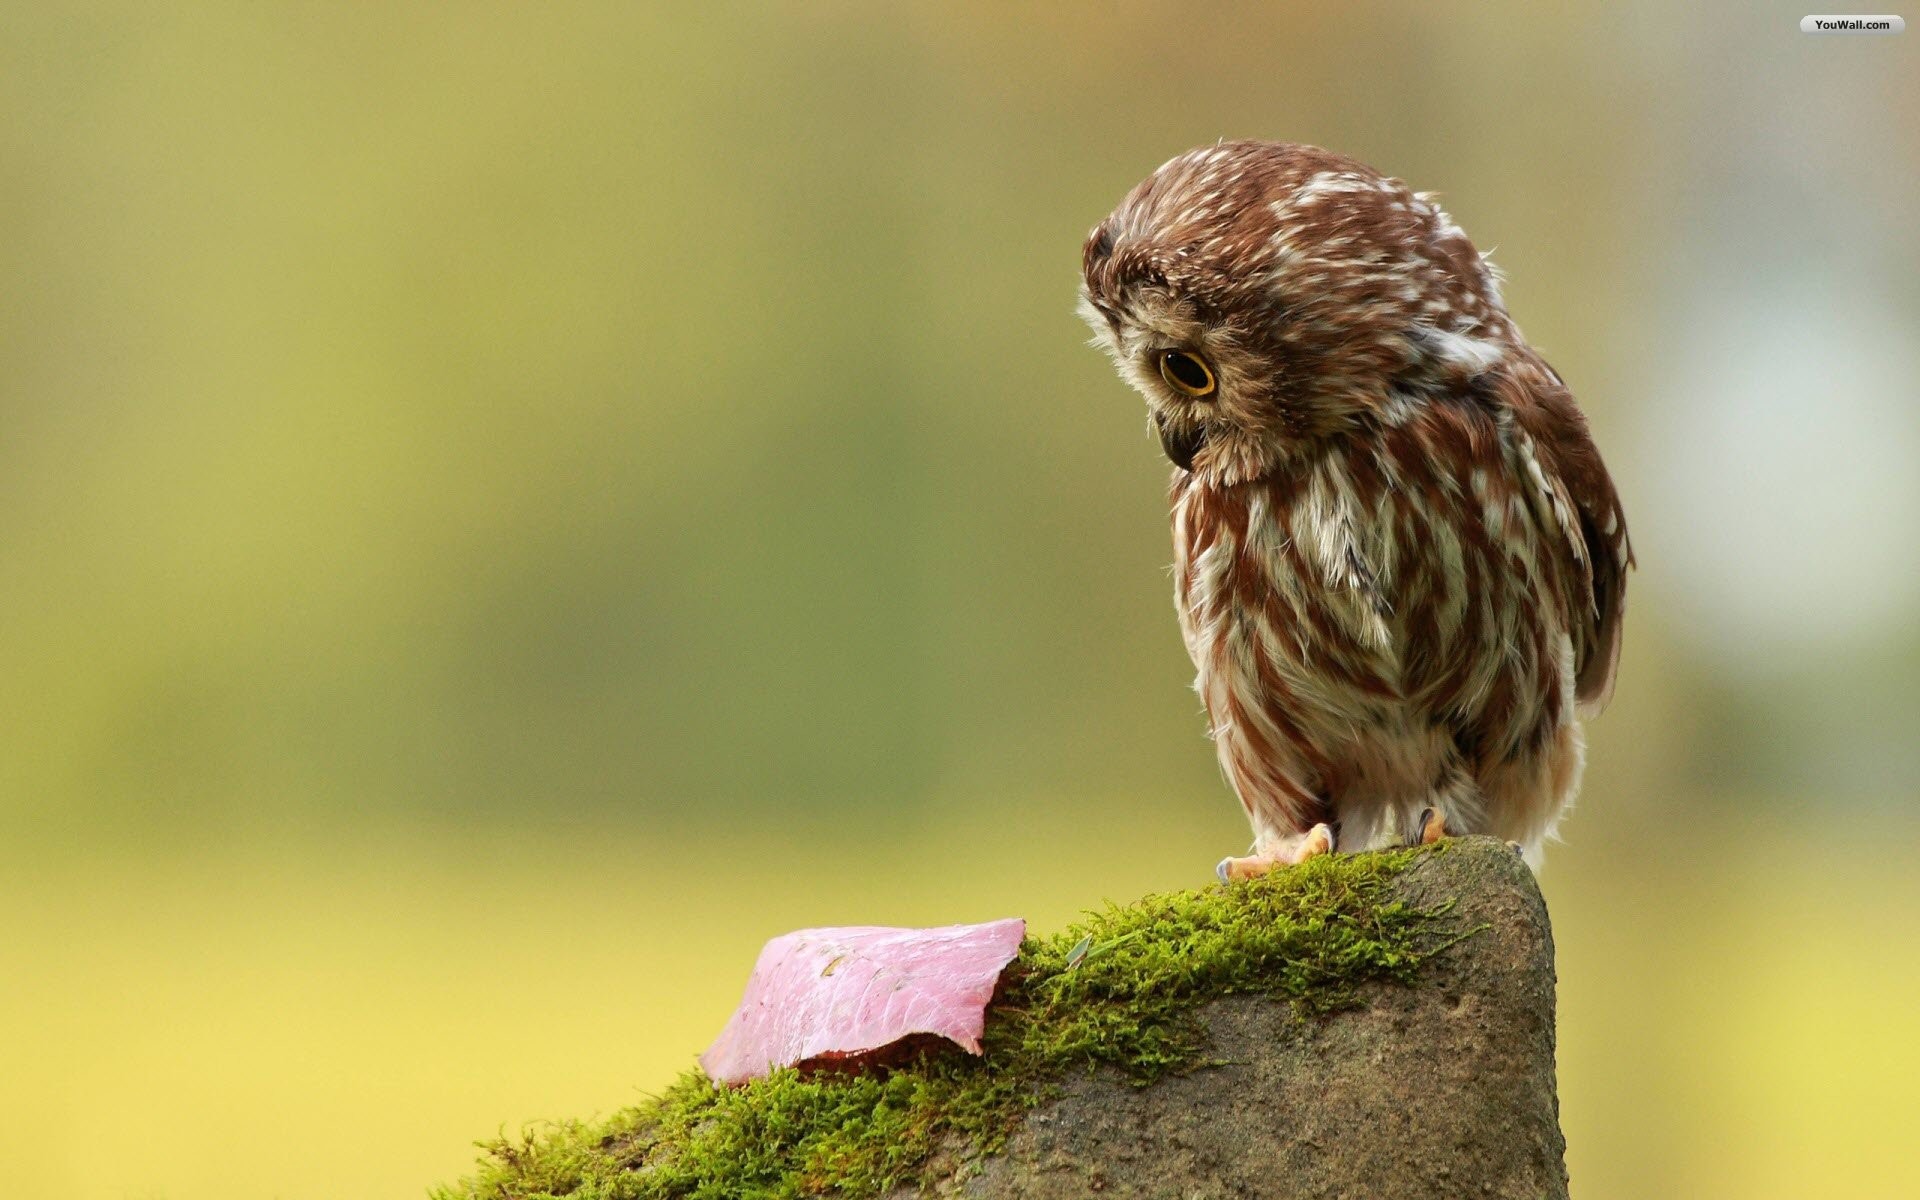 1920x1200 Owl Wallpapers Phone For Iphone Tumblr Hd Cute Iphone : Archived 1920Ã1200